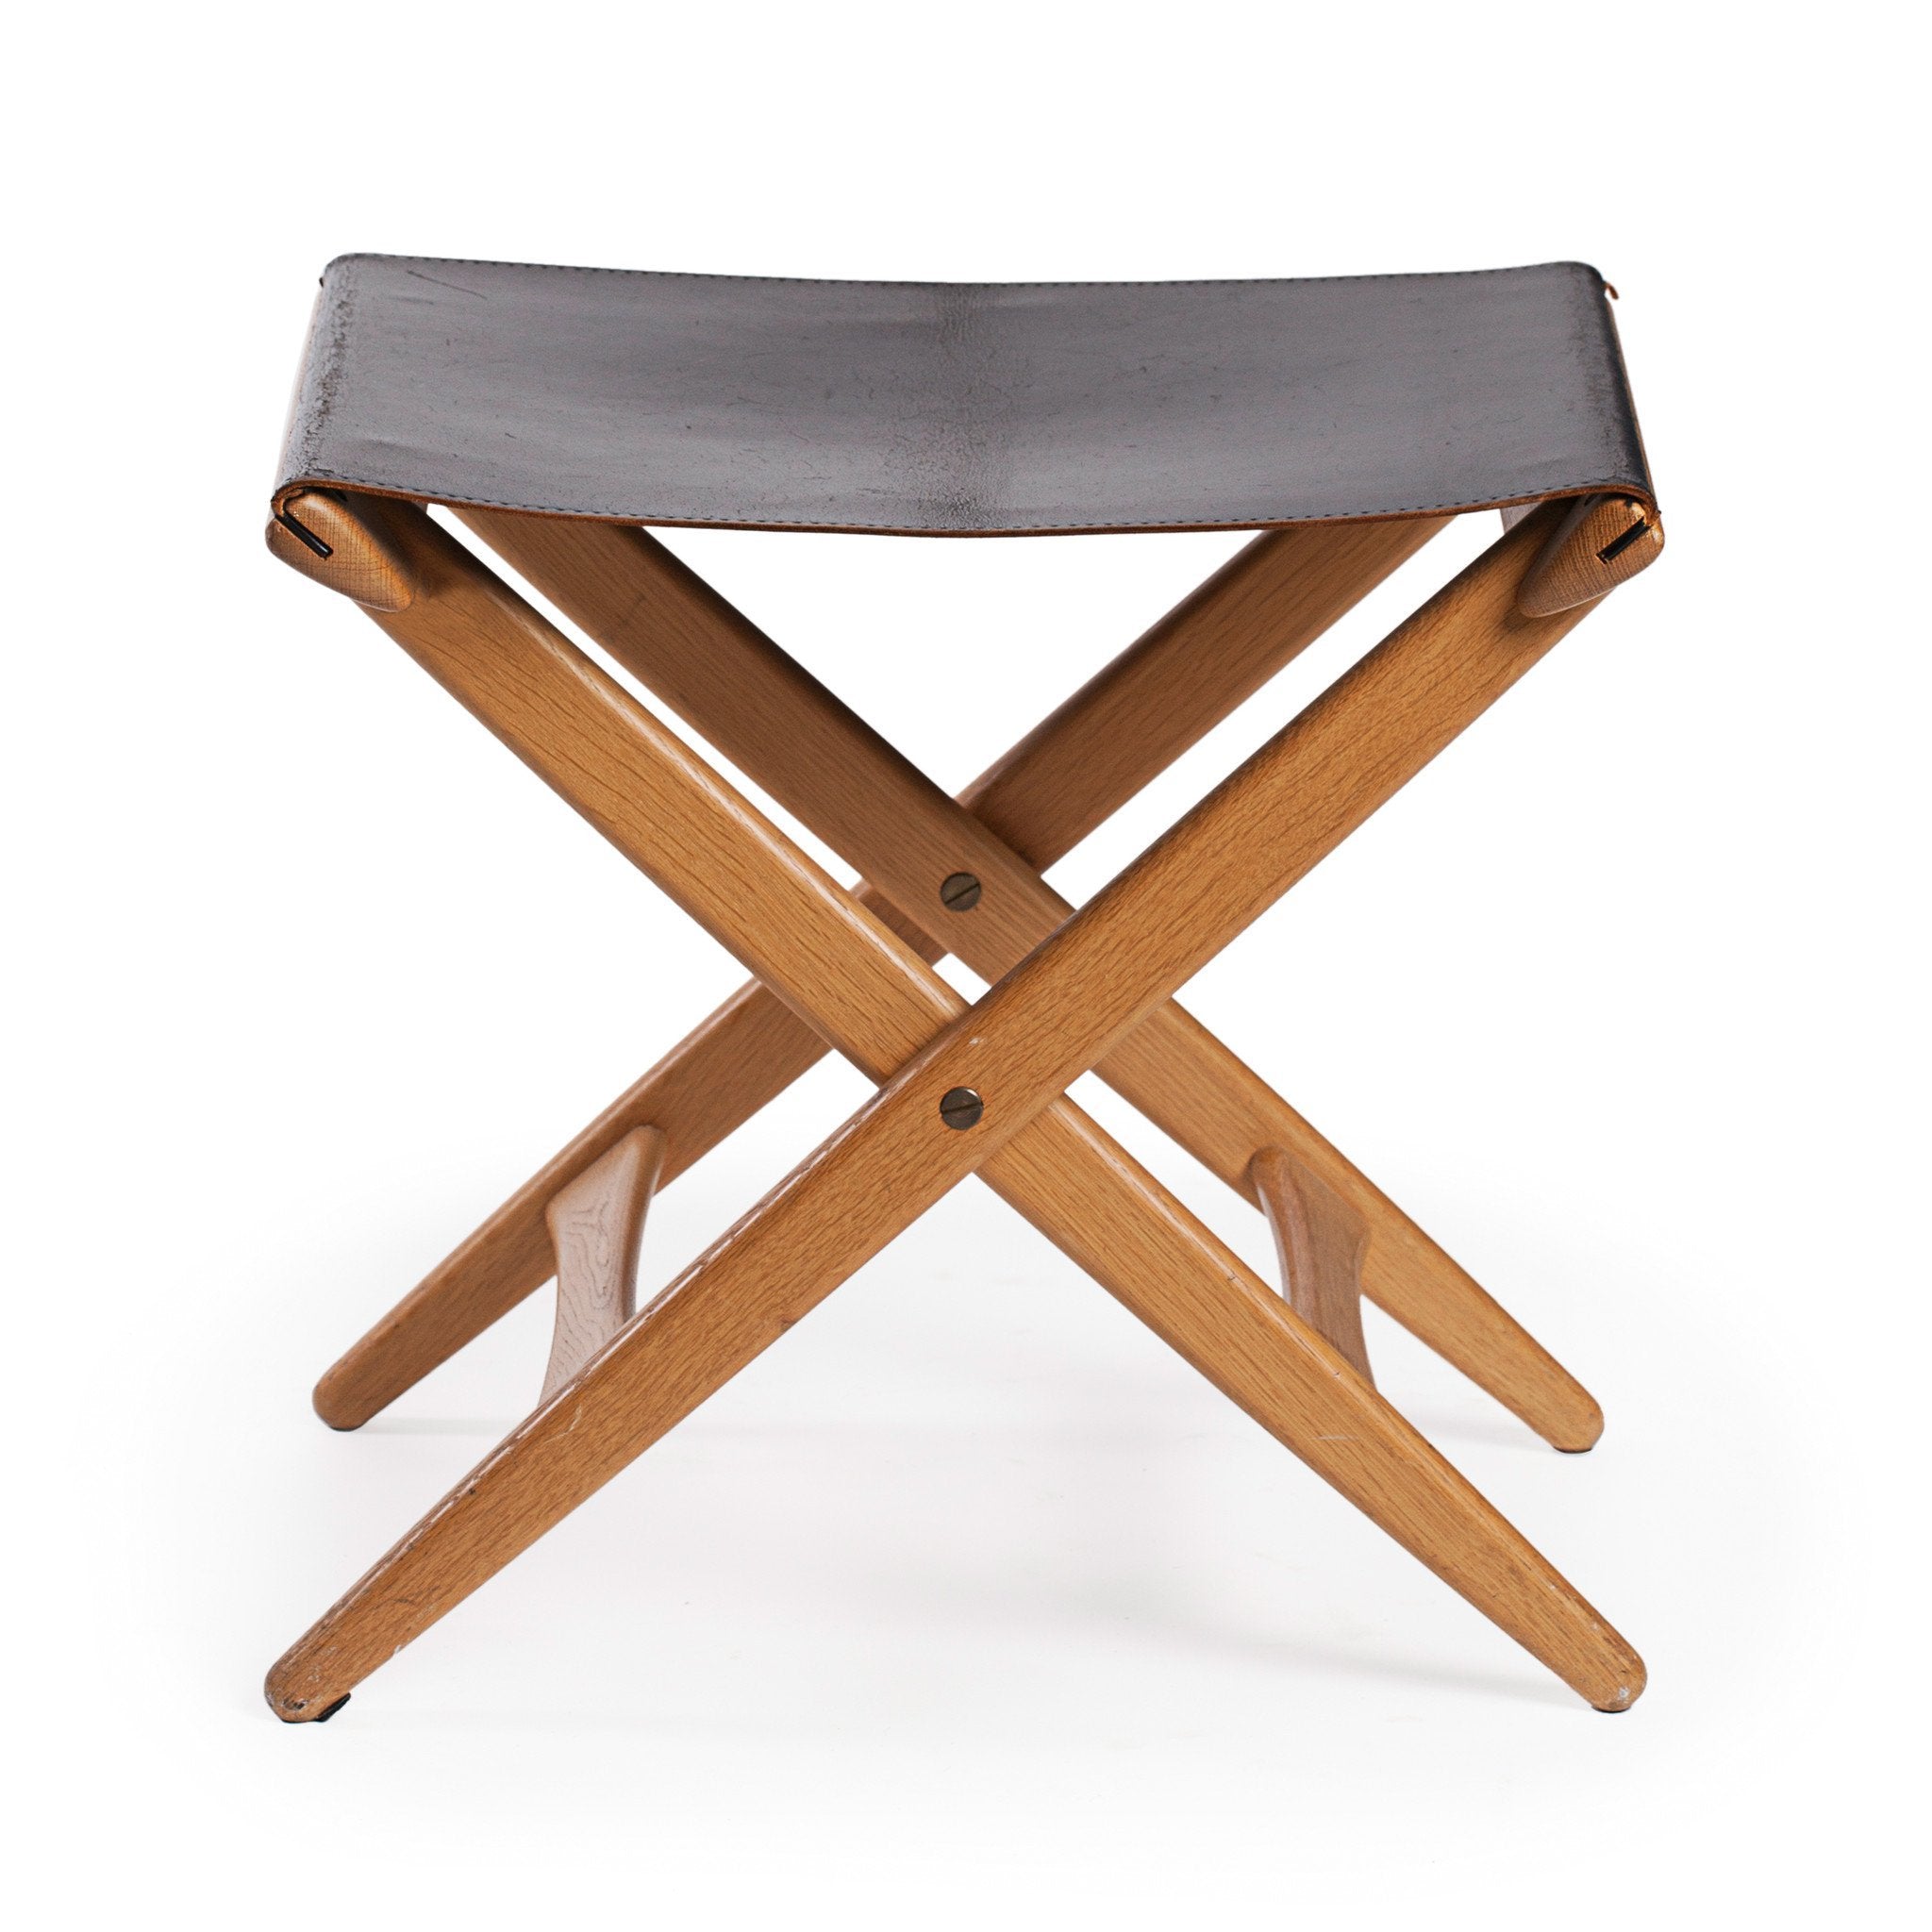 Pair of Folding Stools by Uno and Östen Christiansson - ONEROOM